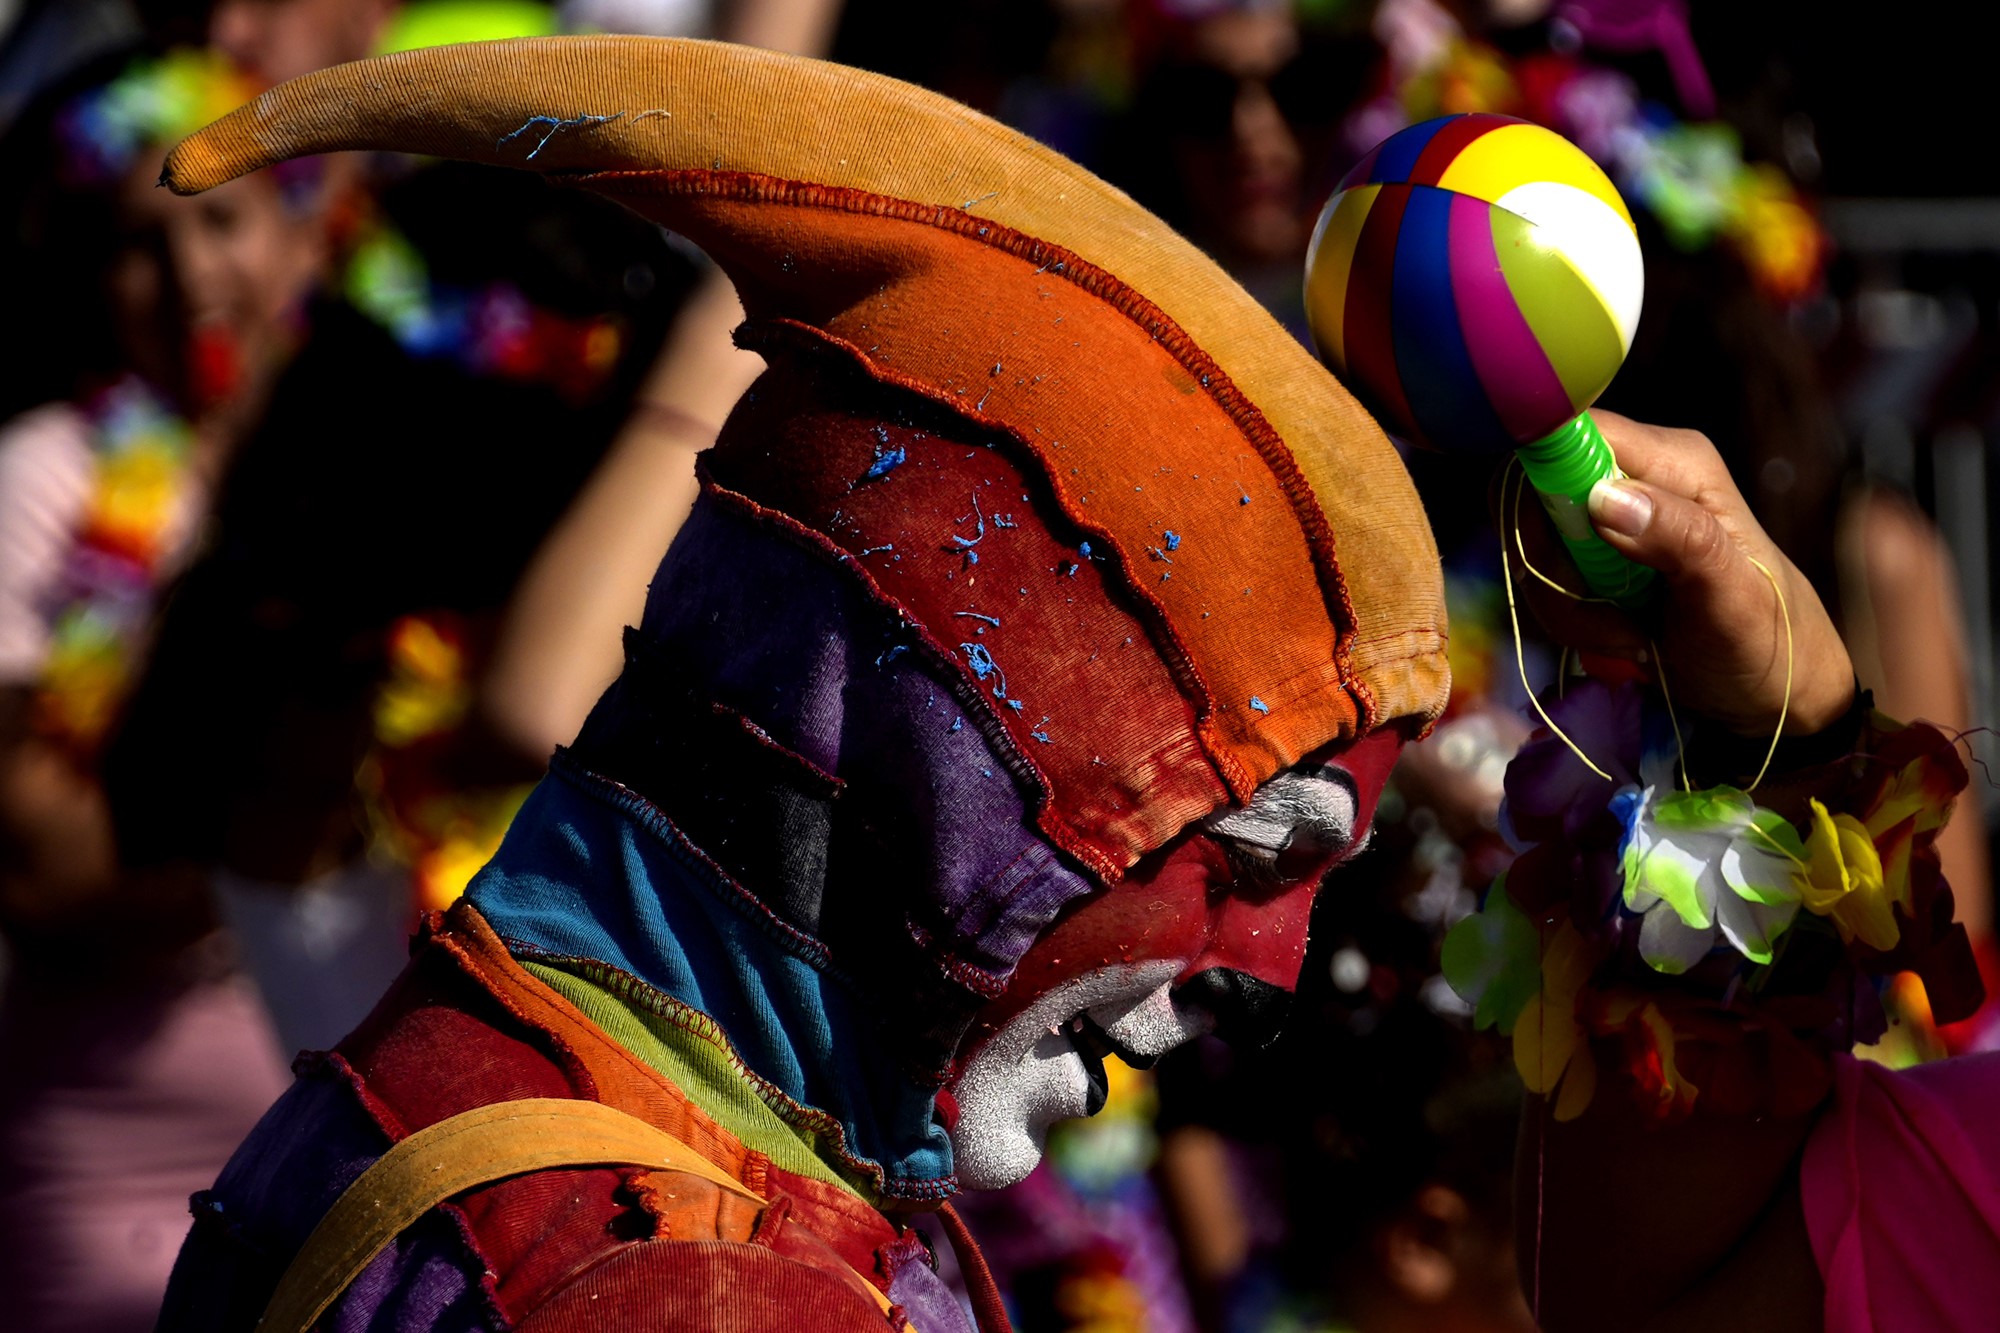 A man wearing carnival costume takes part in a traditional carnival parade